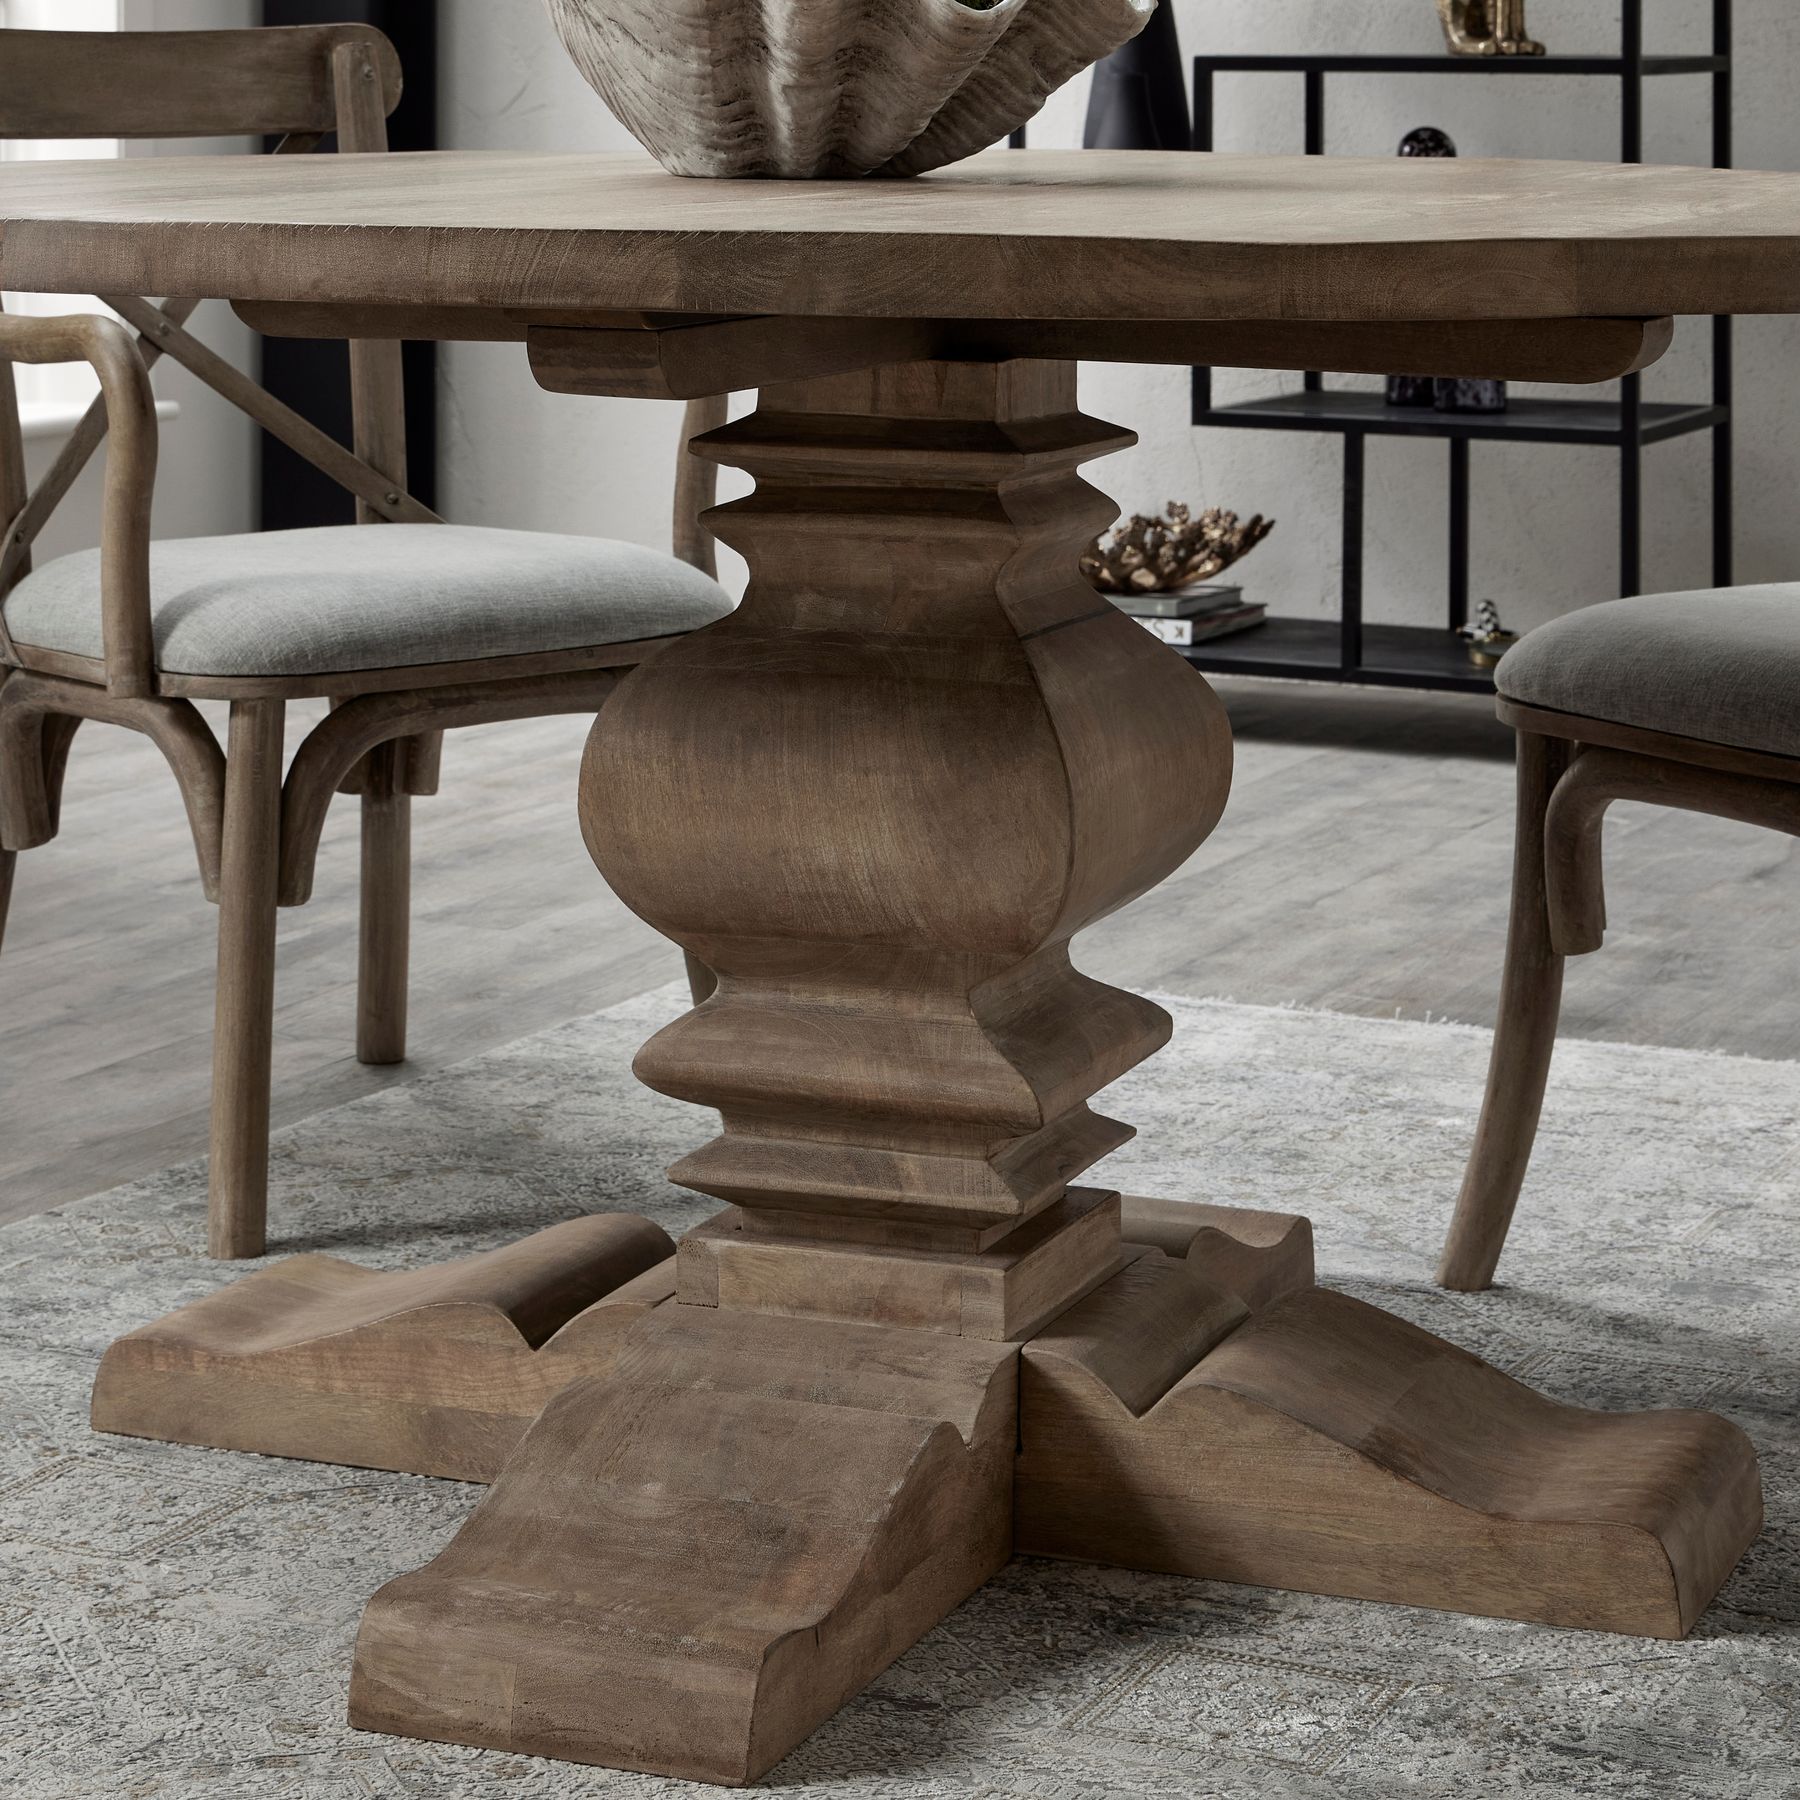 Copgrove Collection Round Pedestal Dining Table - Image 6